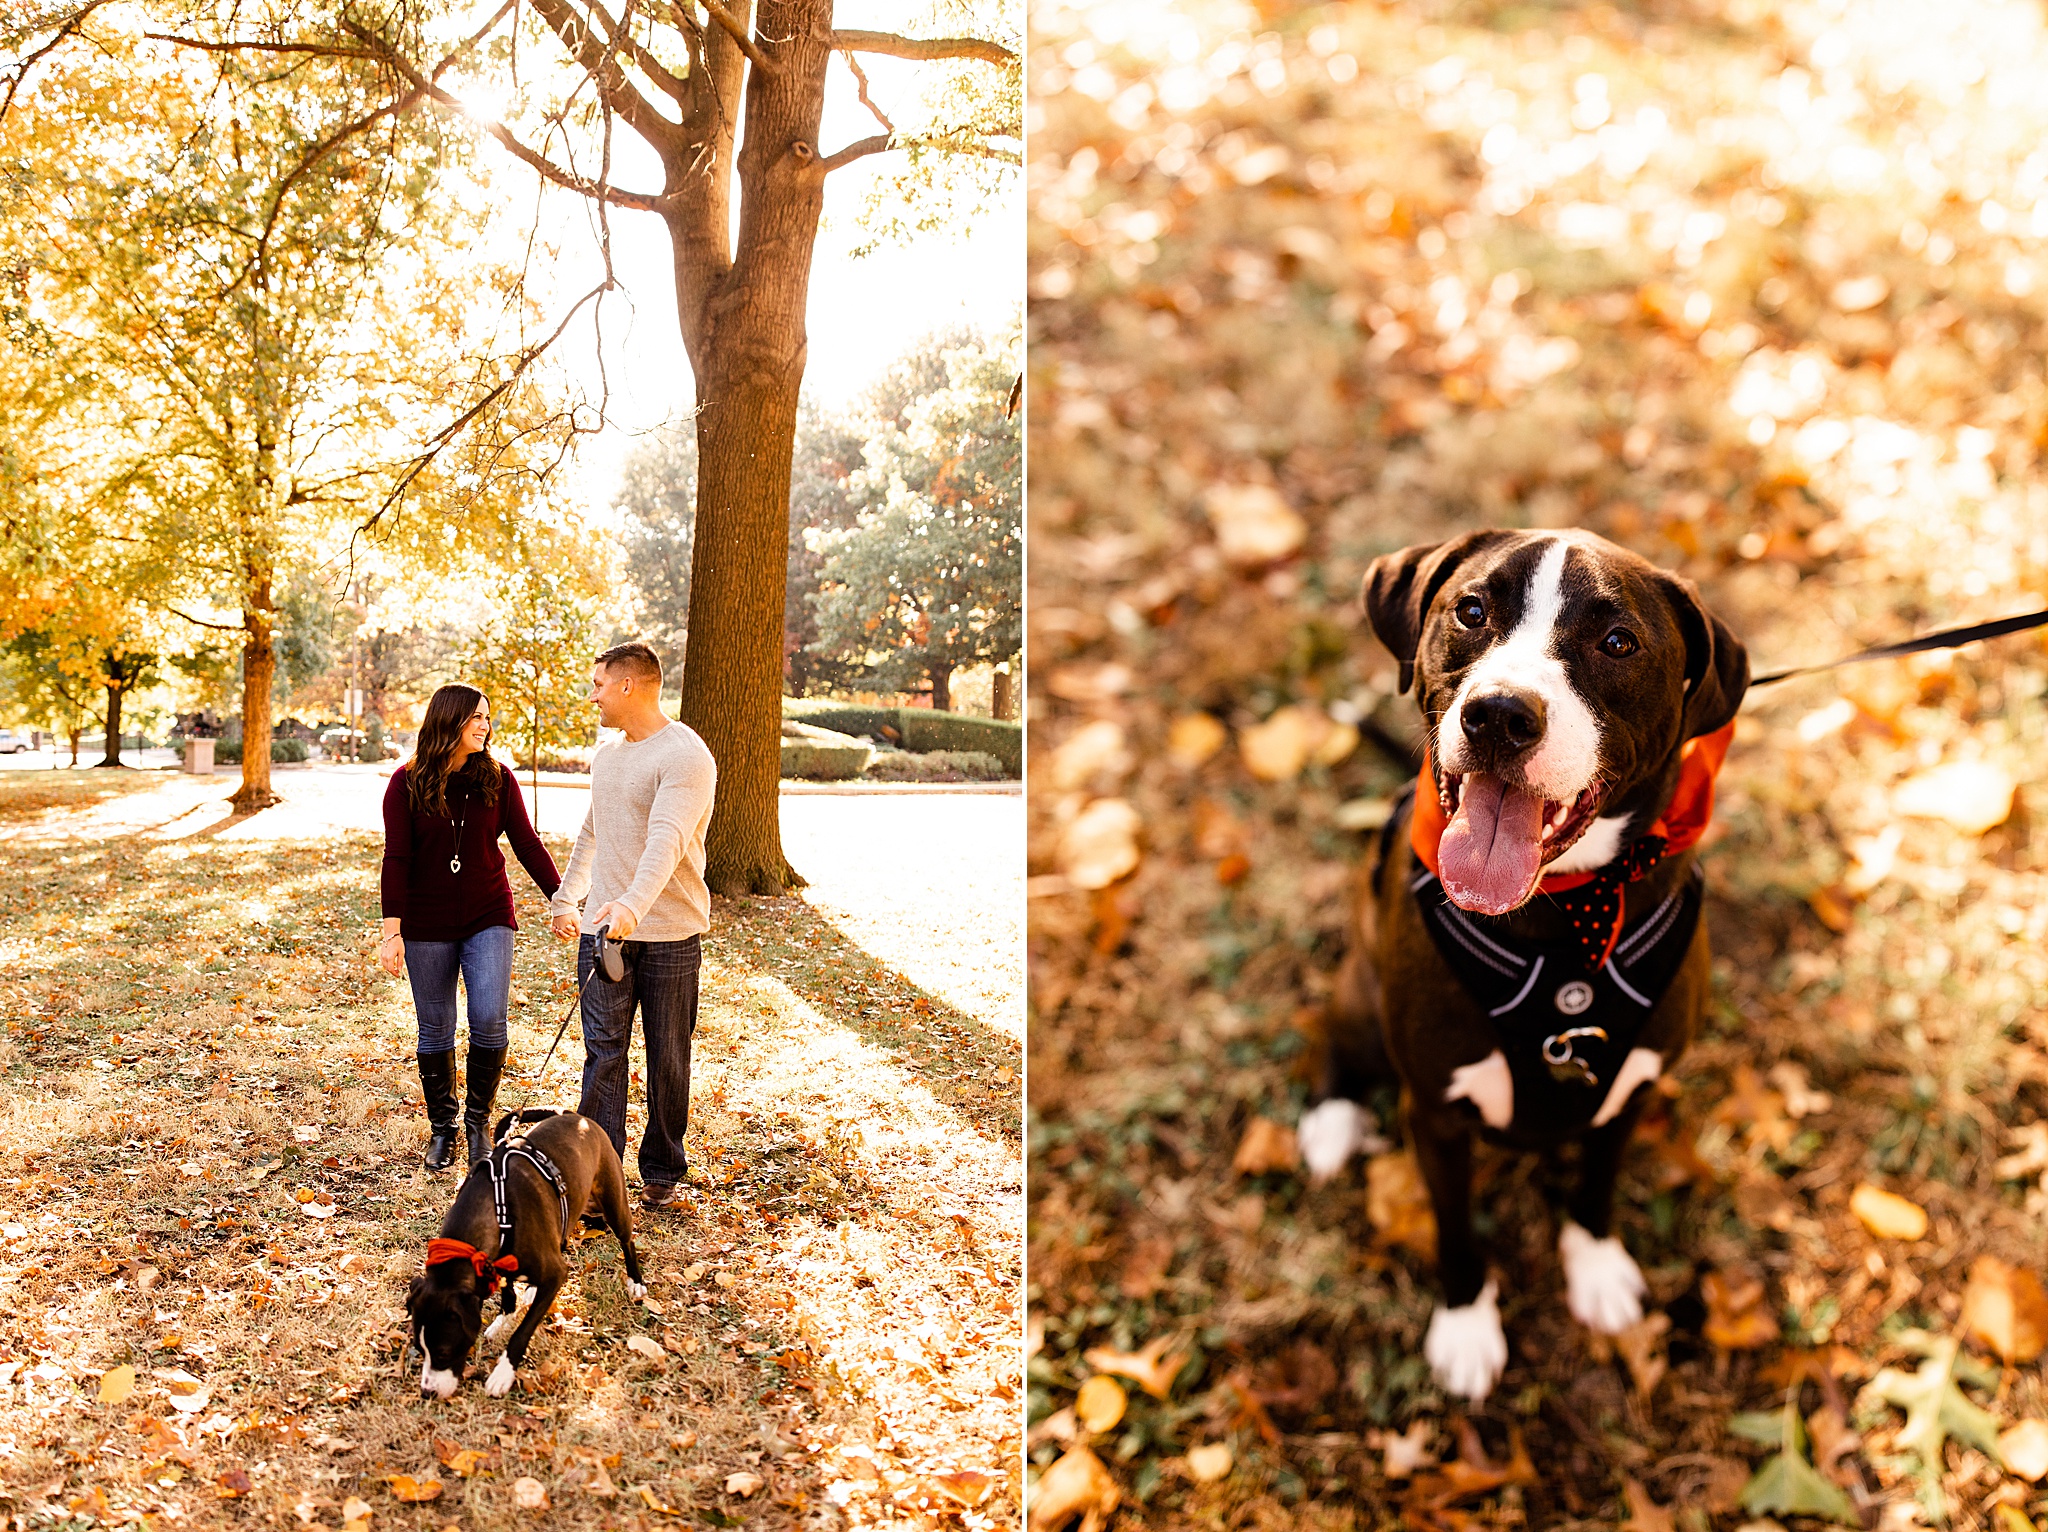 Tips to include your dog in your engagement photos